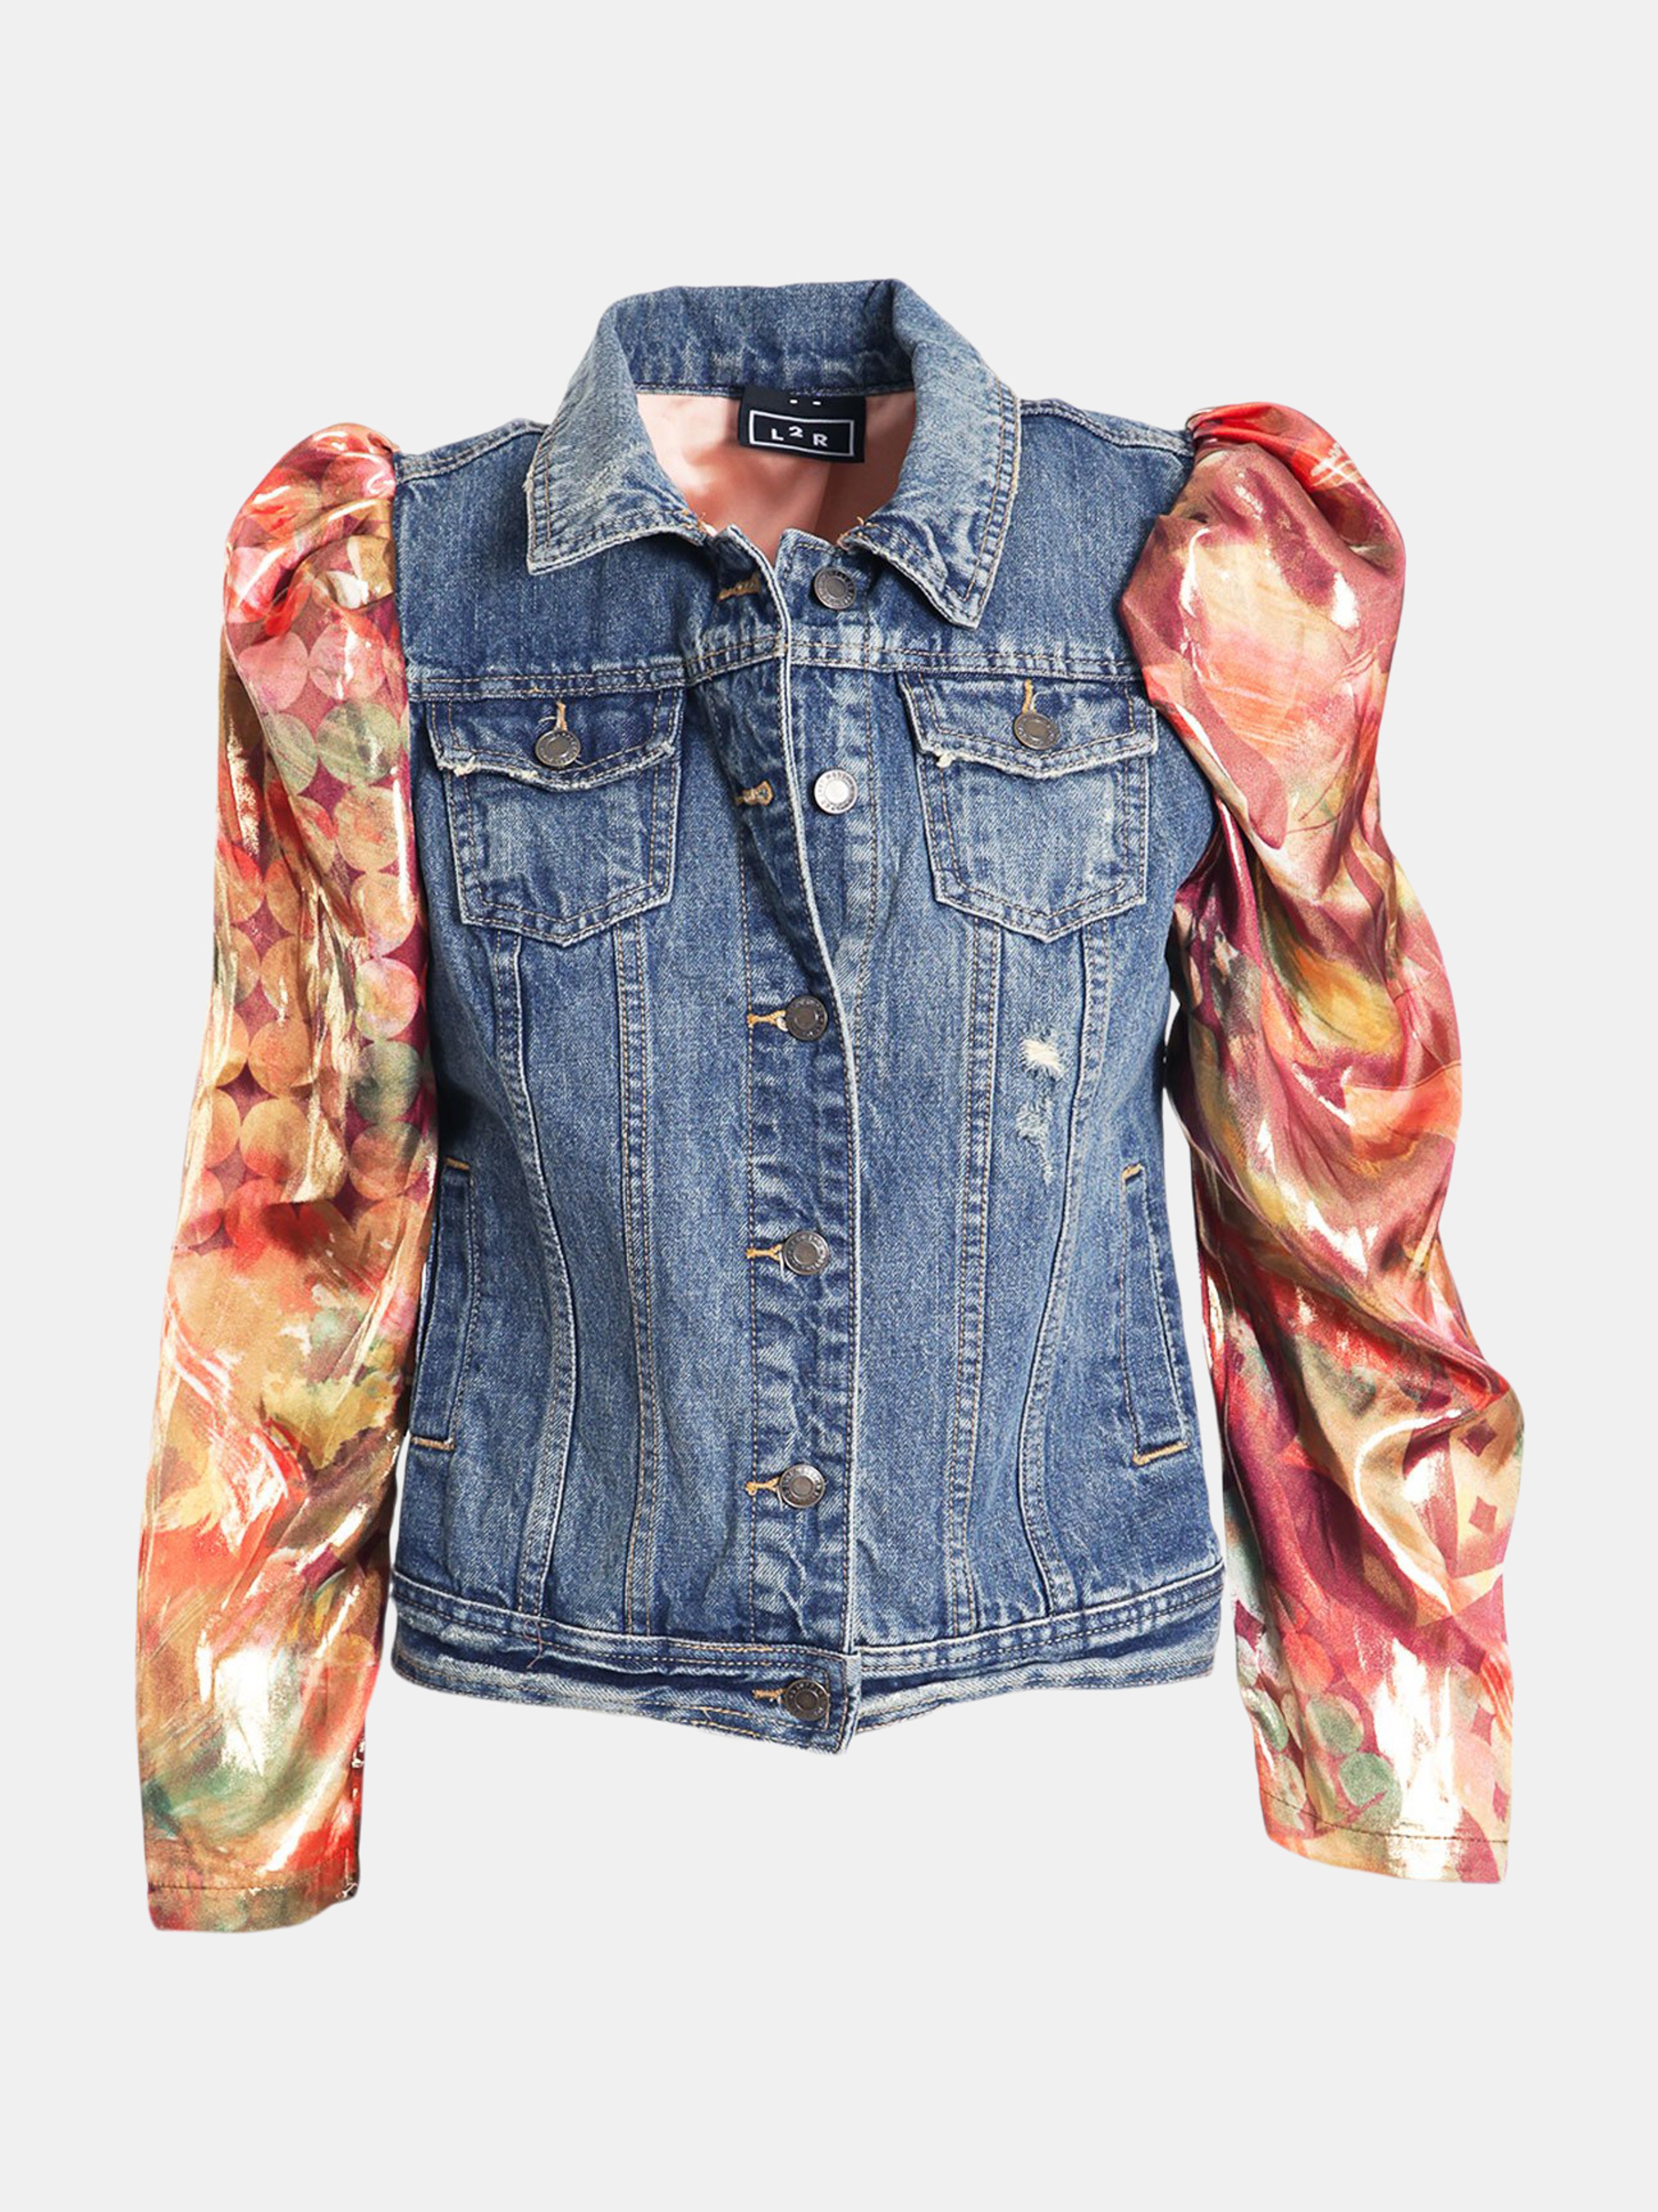 L2R THE LABEL L2R THE LABEL PUFF SLEEVES UPCYCLED DENIM JACKET WITH FLORAL ORANGE LAME SLEEVES